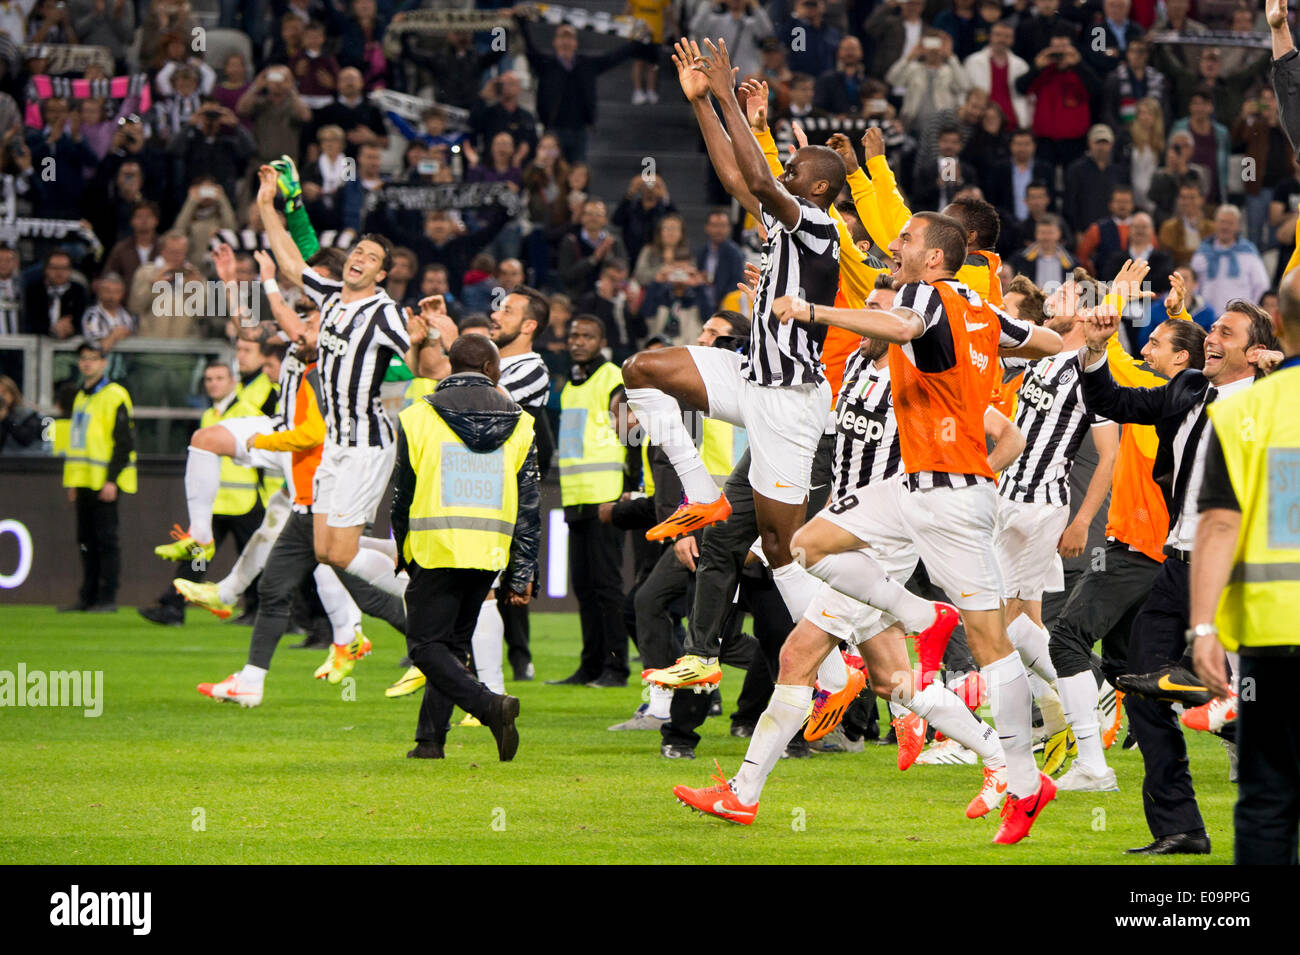 Turin, Italy. 5th May, 2014. Juventus team group Football/Soccer : Juventus players celebrate winning their league title (30th Scudetto) after the Italian 'Serie A' match between Juventus 1-0 Atalanta at Juventus Stadium in Turin, Italy . © Maurizio Borsa Stock Photo